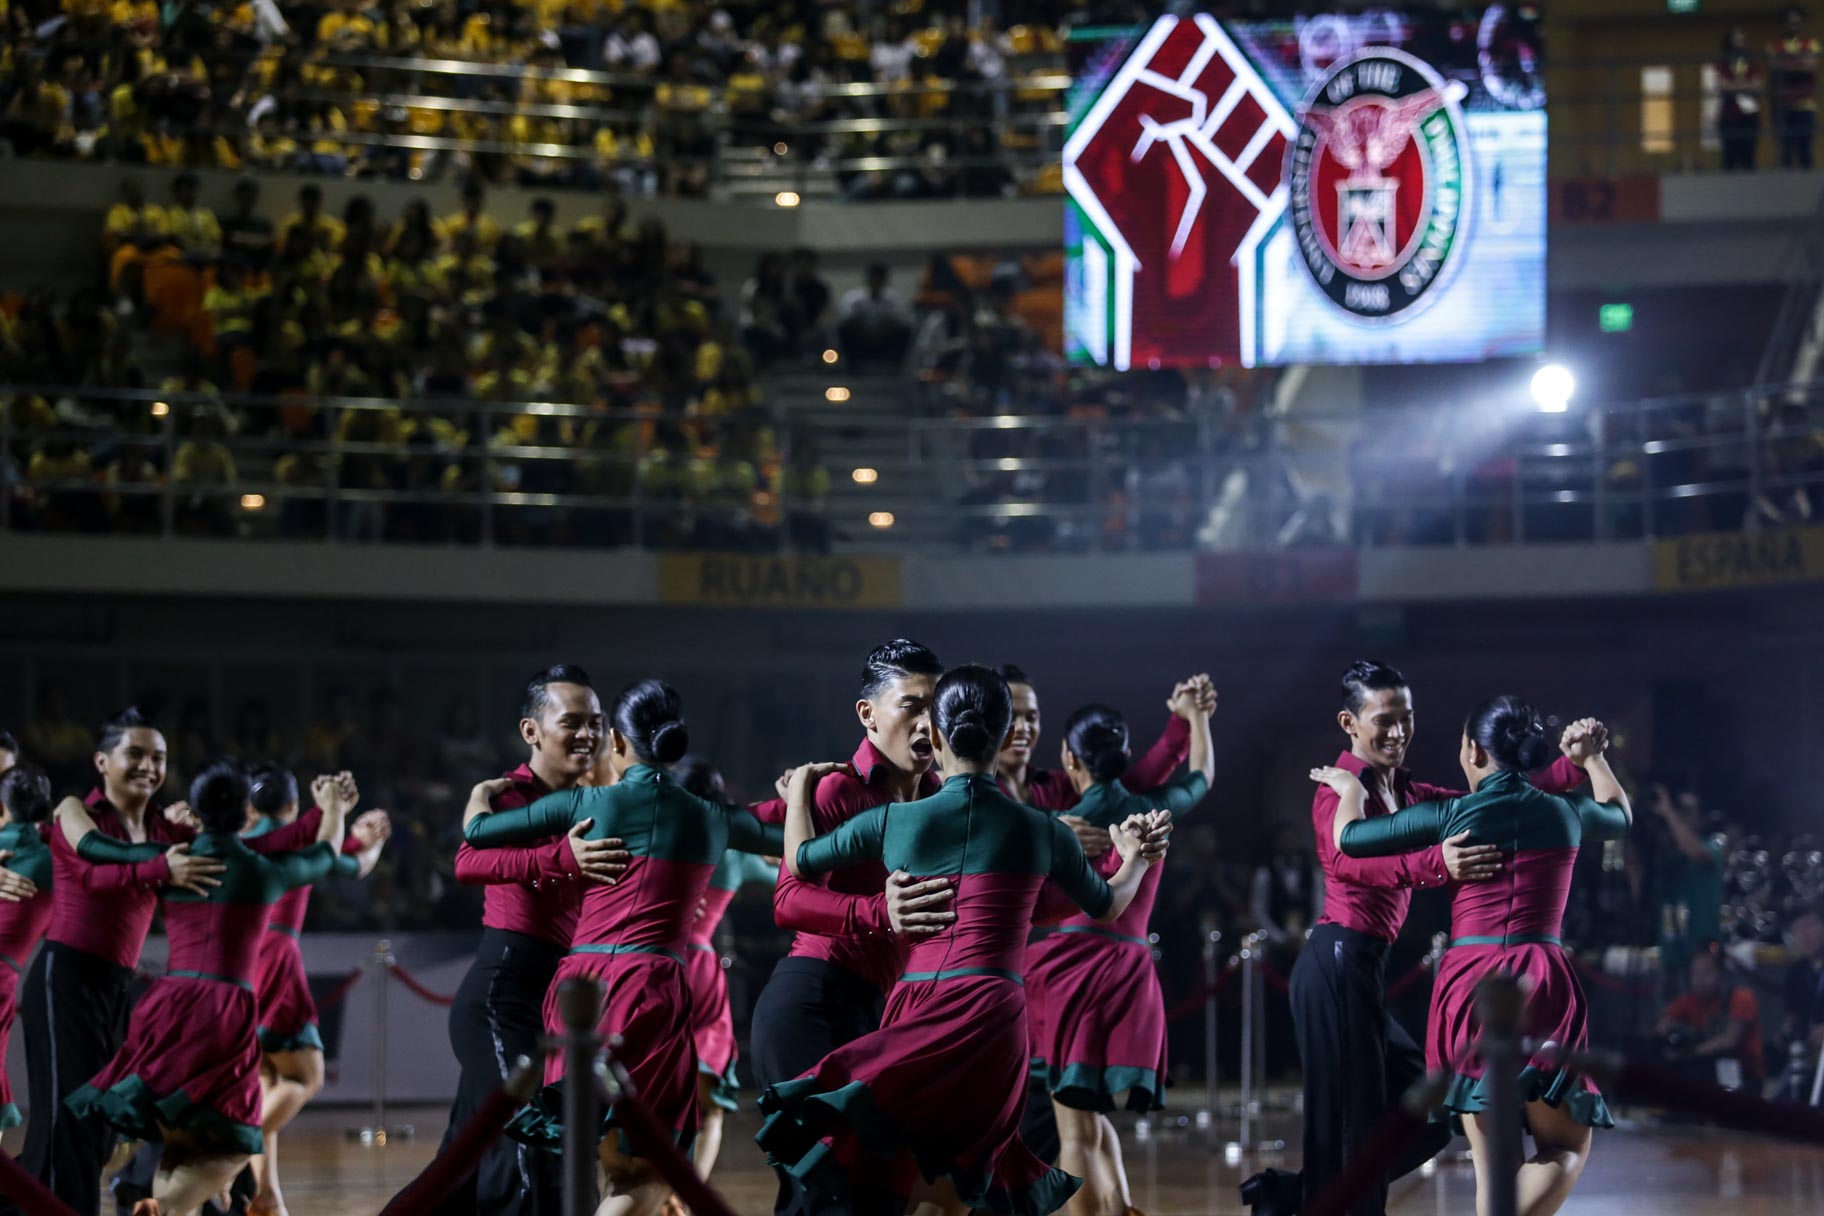 UP Ballroom Formation Team performs. Photo by Tristan Tamayo/INQUIRER.net